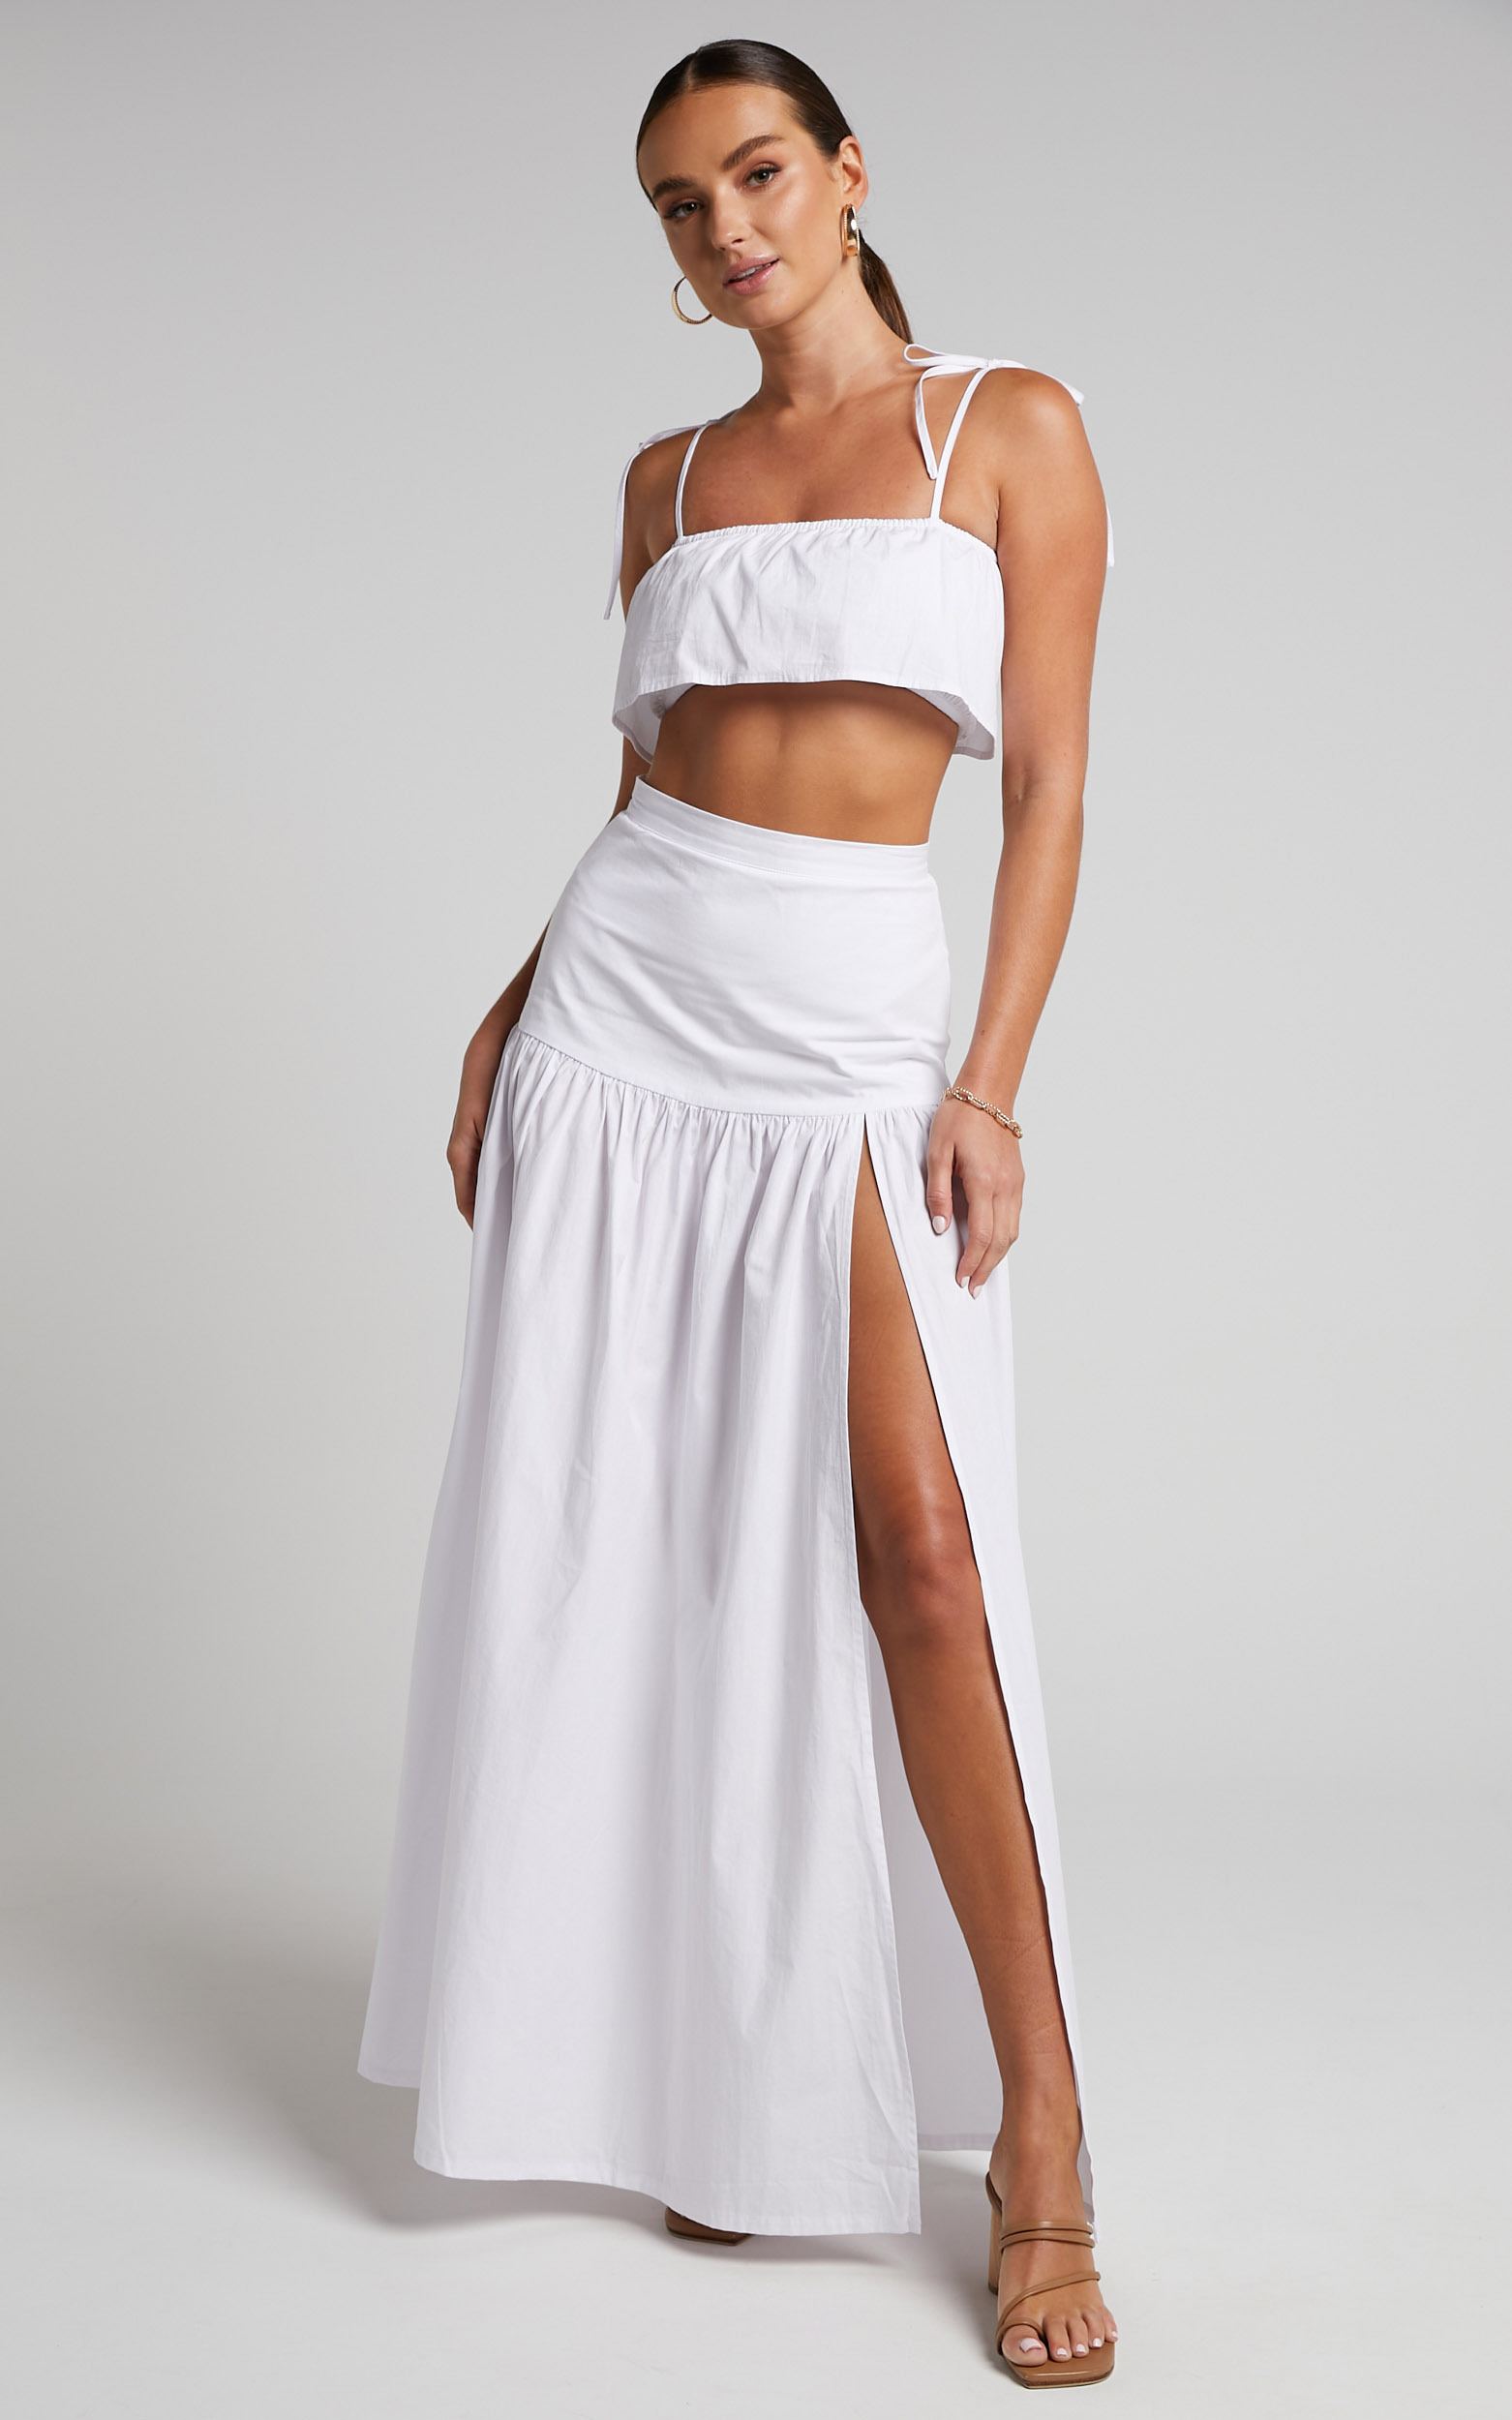 Ivanna Two Piece Set - Tie Shoulder Crop Top and Drop Waist Maxi Skirt in White - 04, WHT1, hi-res image number null